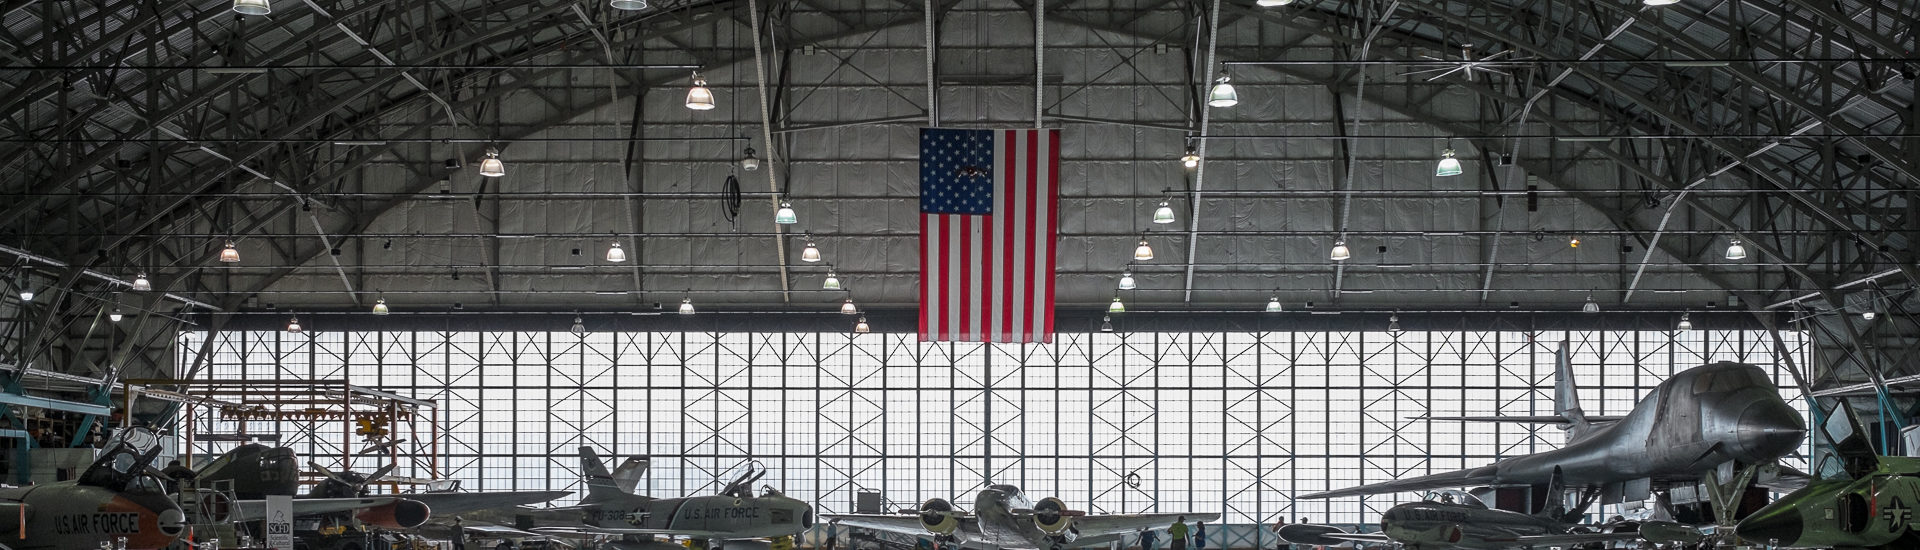 Airplane hanger full of airplanes and a large American flag hanging down from the ceiling in the center